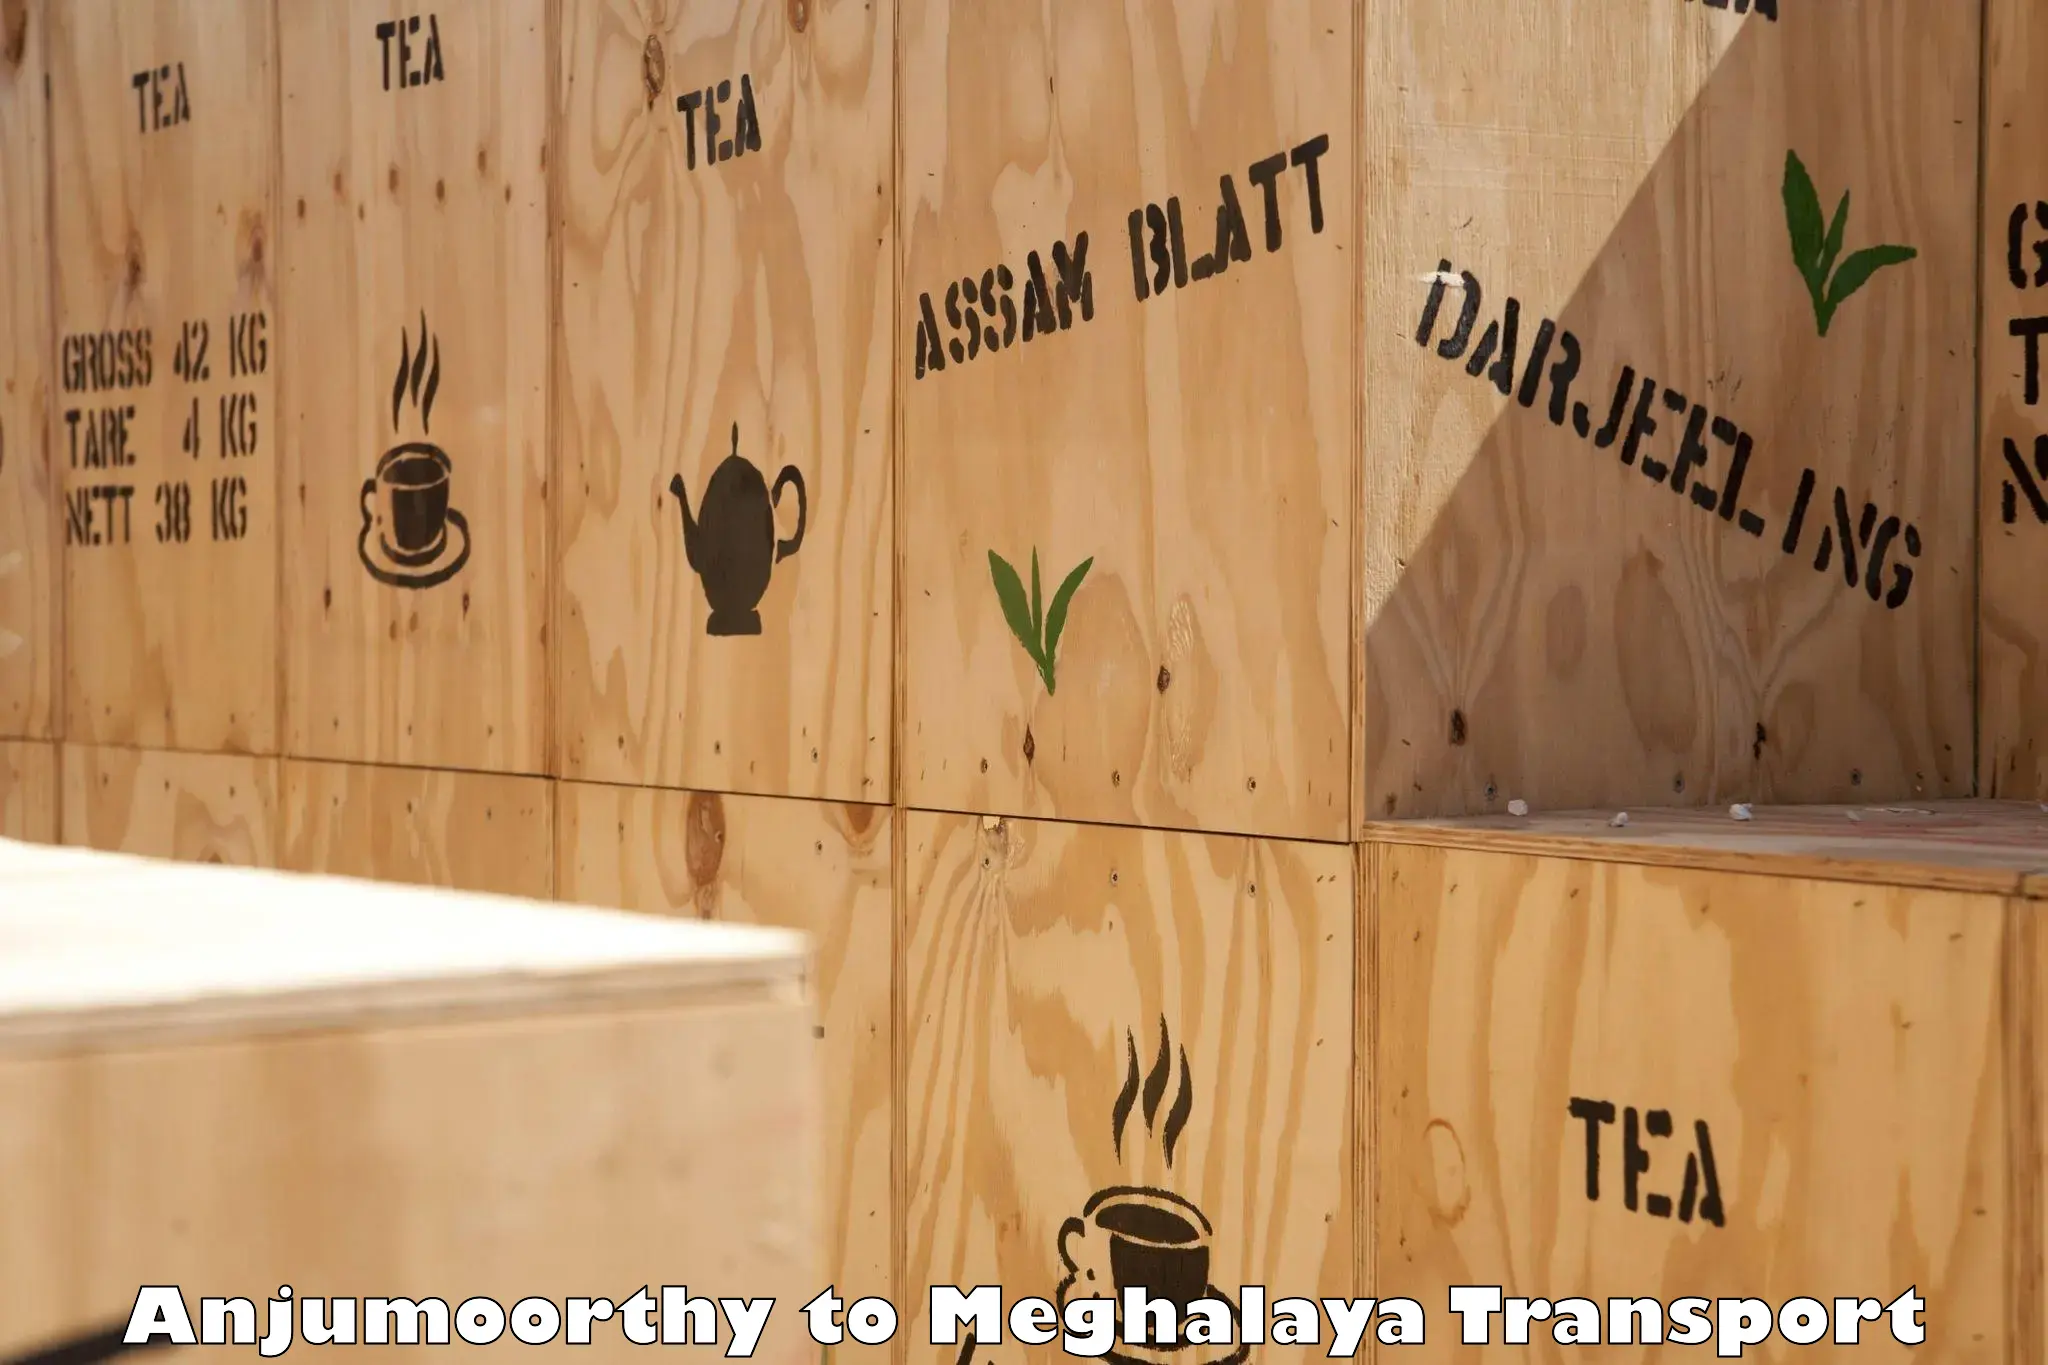 Express transport services in Anjumoorthy to Meghalaya